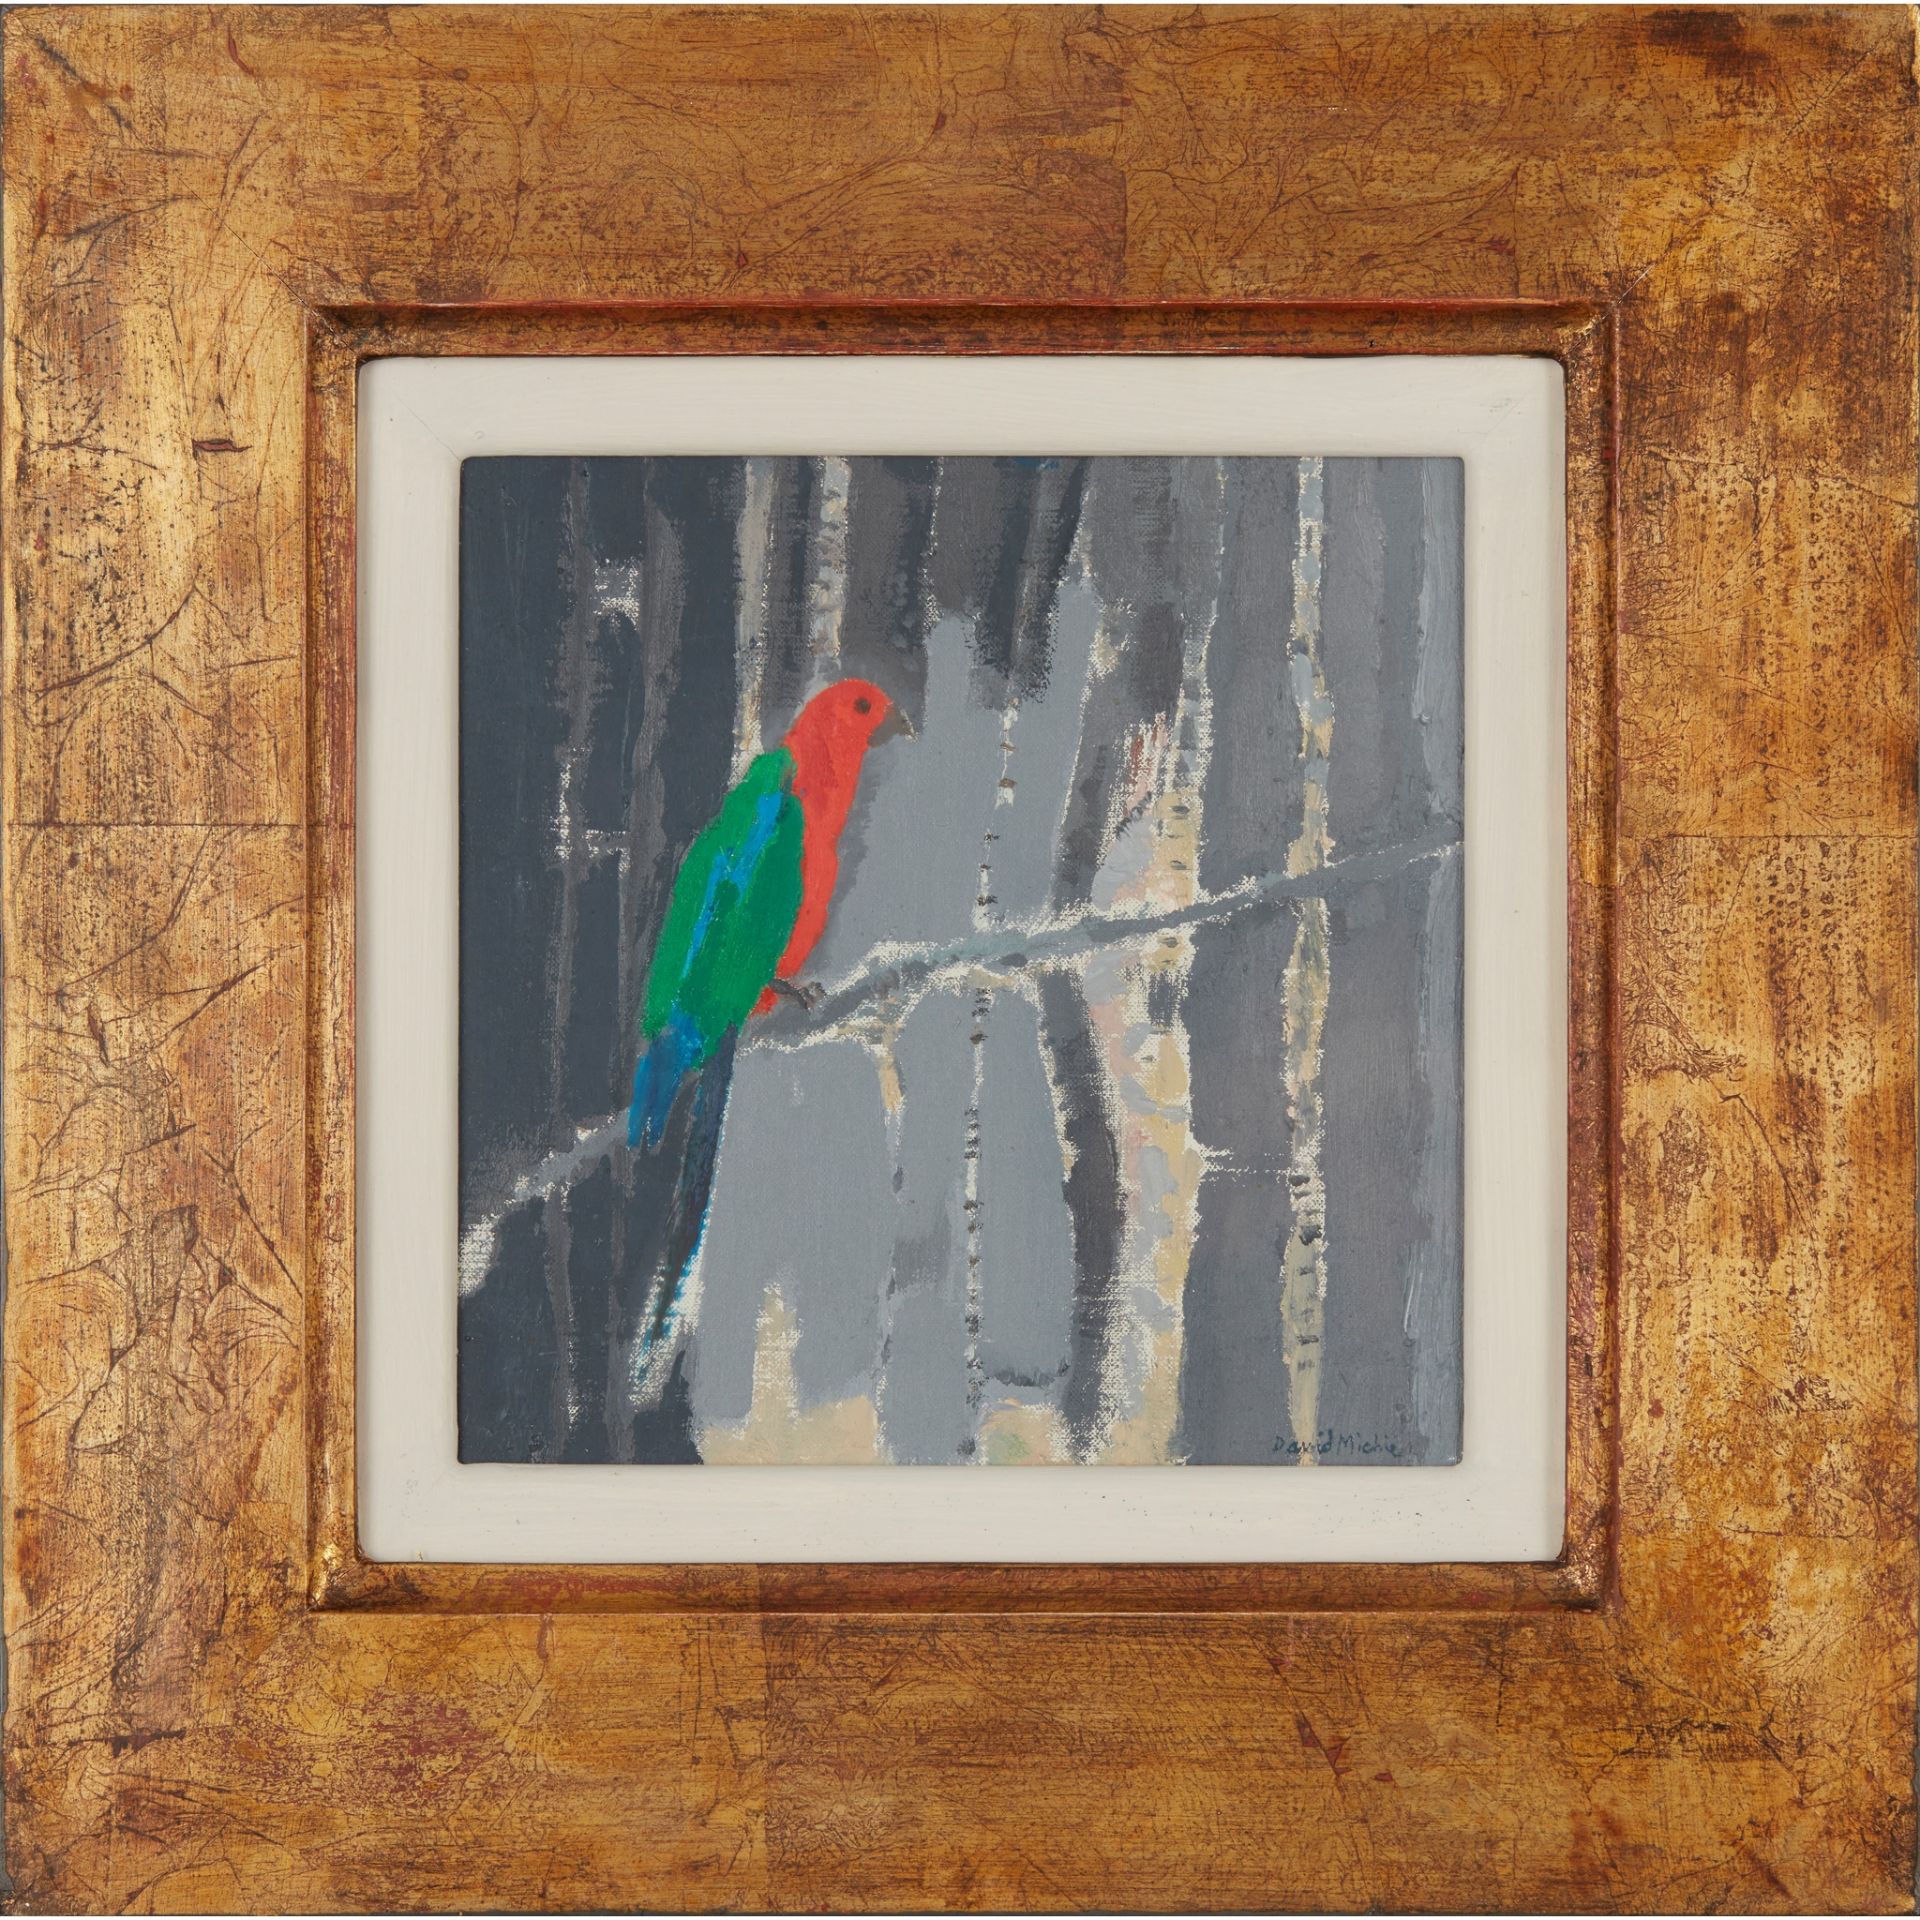 § DAVID MICHIE O.B.E., R.S.A., R.G.I., F.R.S.A (SCOTTISH 1928-2015) KING PARROT - Image 2 of 3